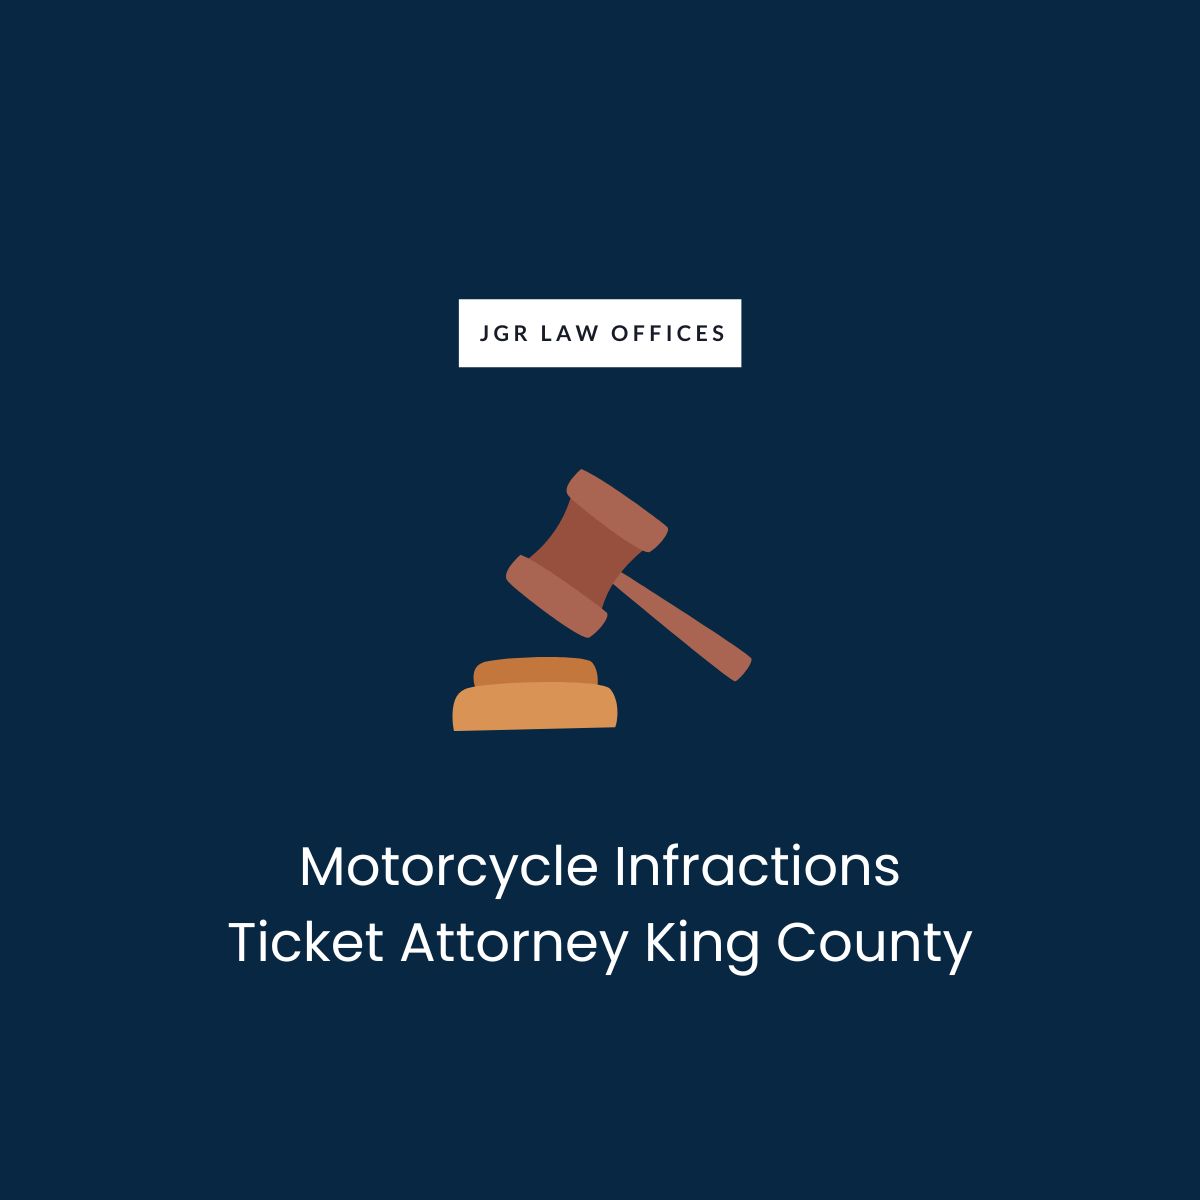 Motorcycle Infractions Ticket Attorney King County